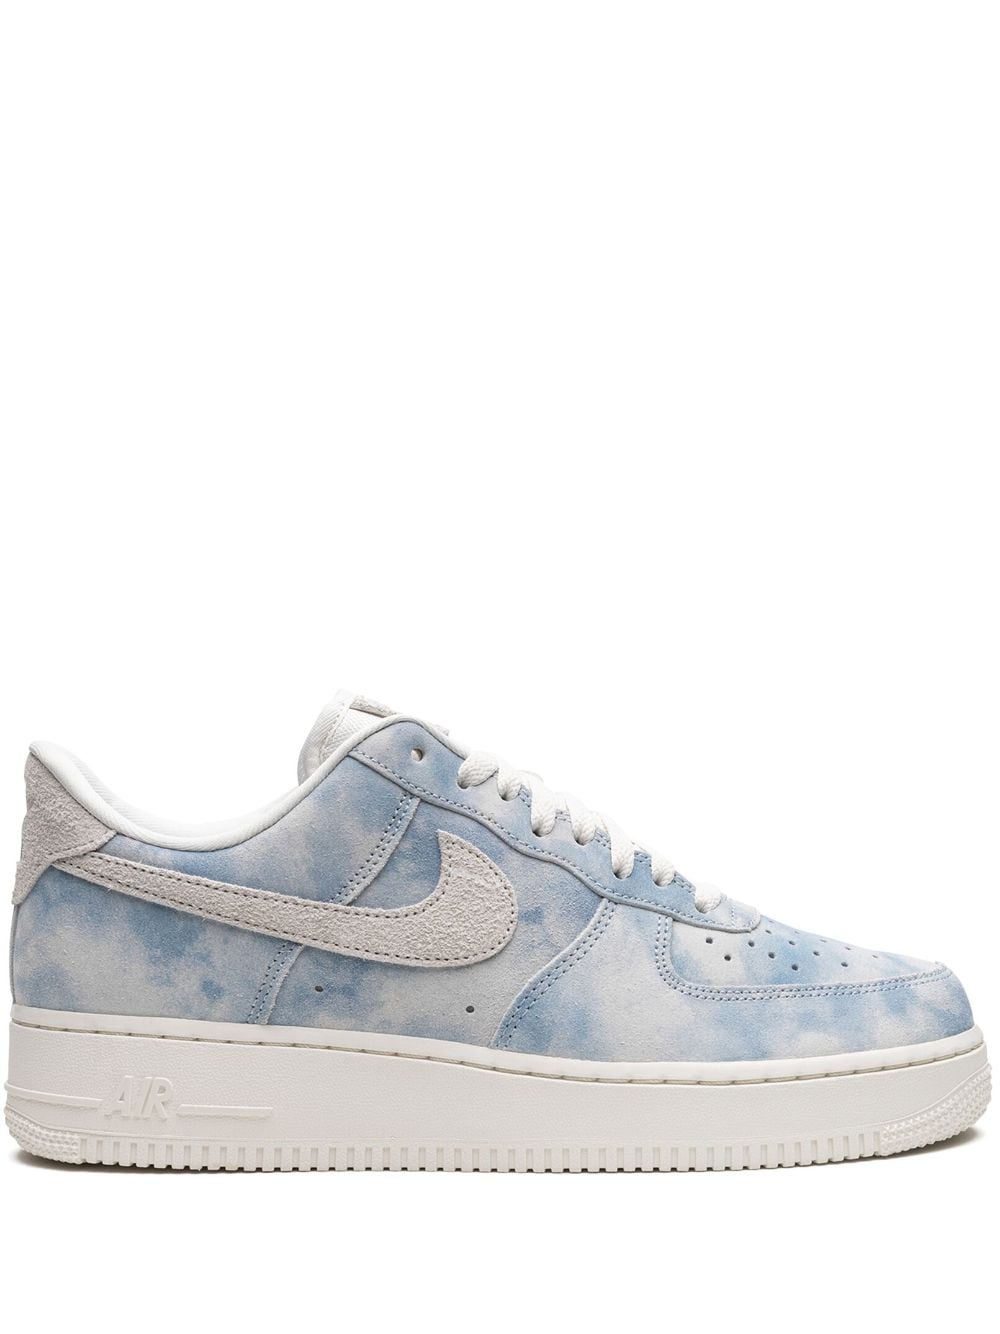 Nike Air Force 1 Low SE "Clouds" sneakers - Blue von Nike